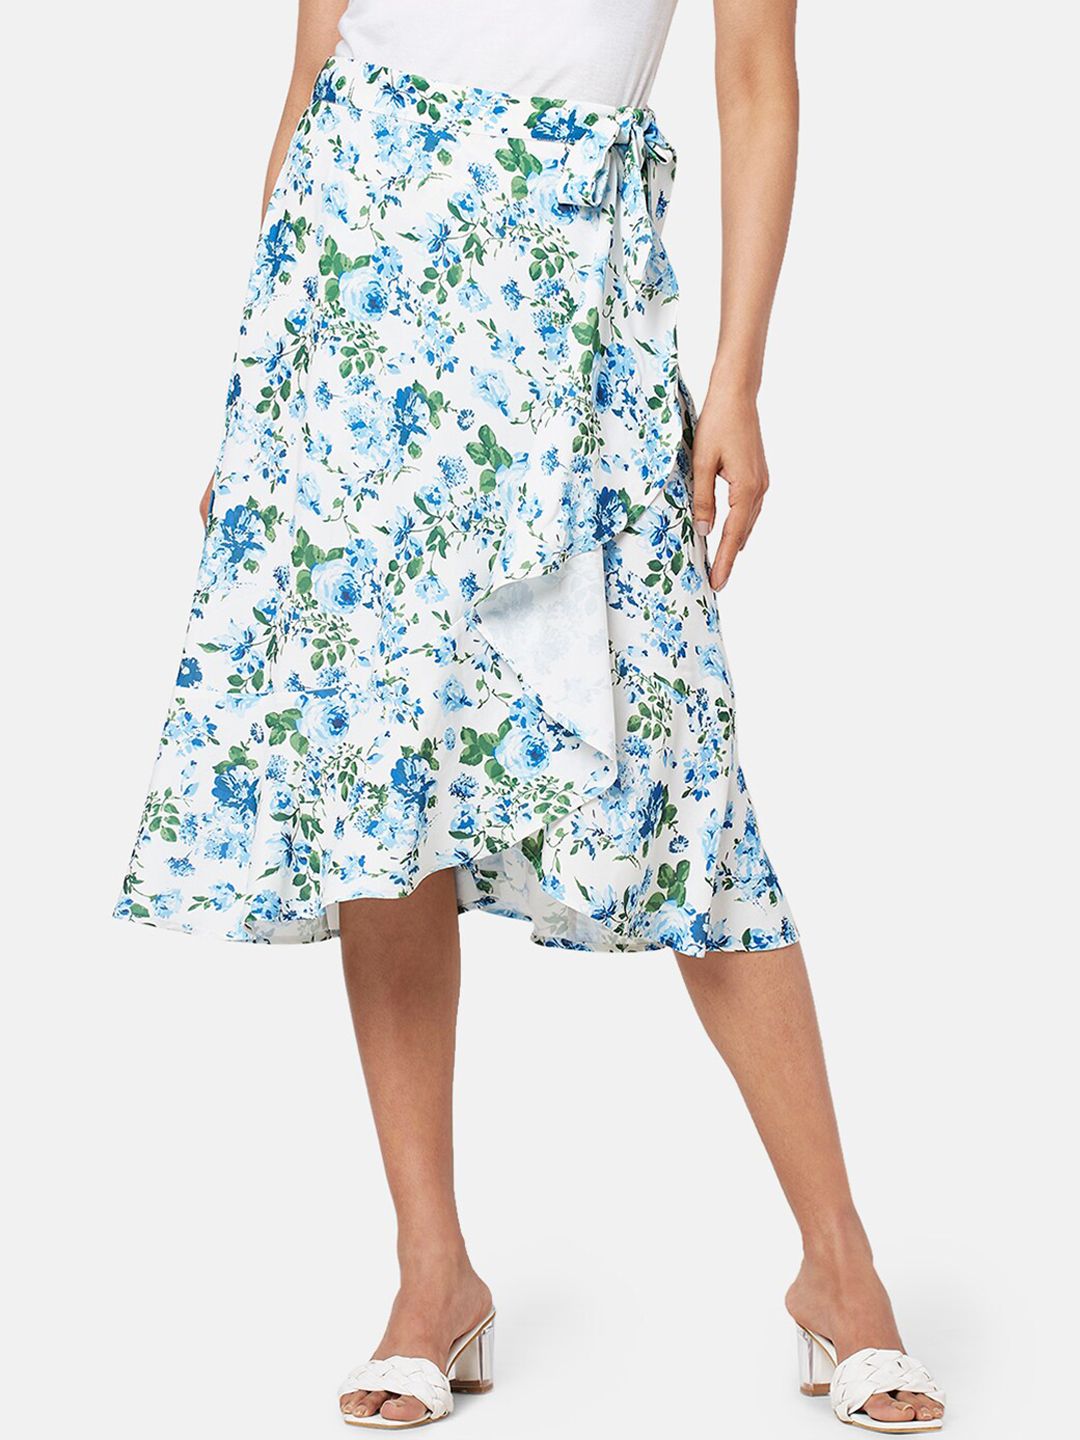 Honey by Pantaloons Floral Printed Knee-Length Tie-Up Wrap Skirt Price in India